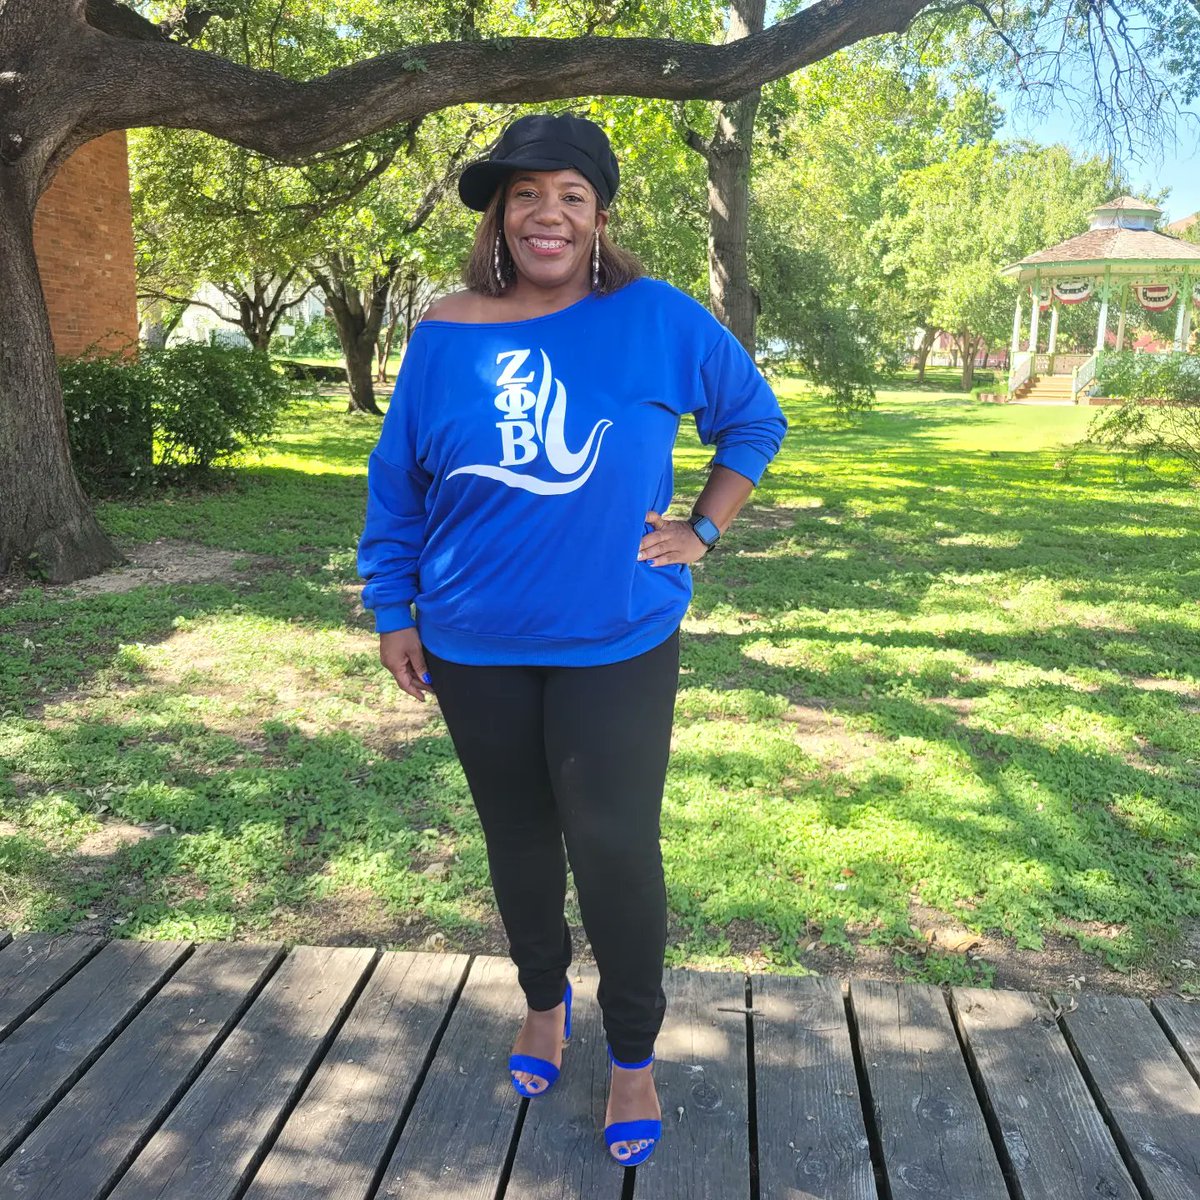 Our next installment of Finer Fridays: The Decades Edition! Sorors of 1990s! Making Greater Dallas FINER since 1931… #kzforeverfiner #greaterdallaszetas #FinerDecades
Joined Zeta Phi Beta Sorority Inc in the 1990s decade.